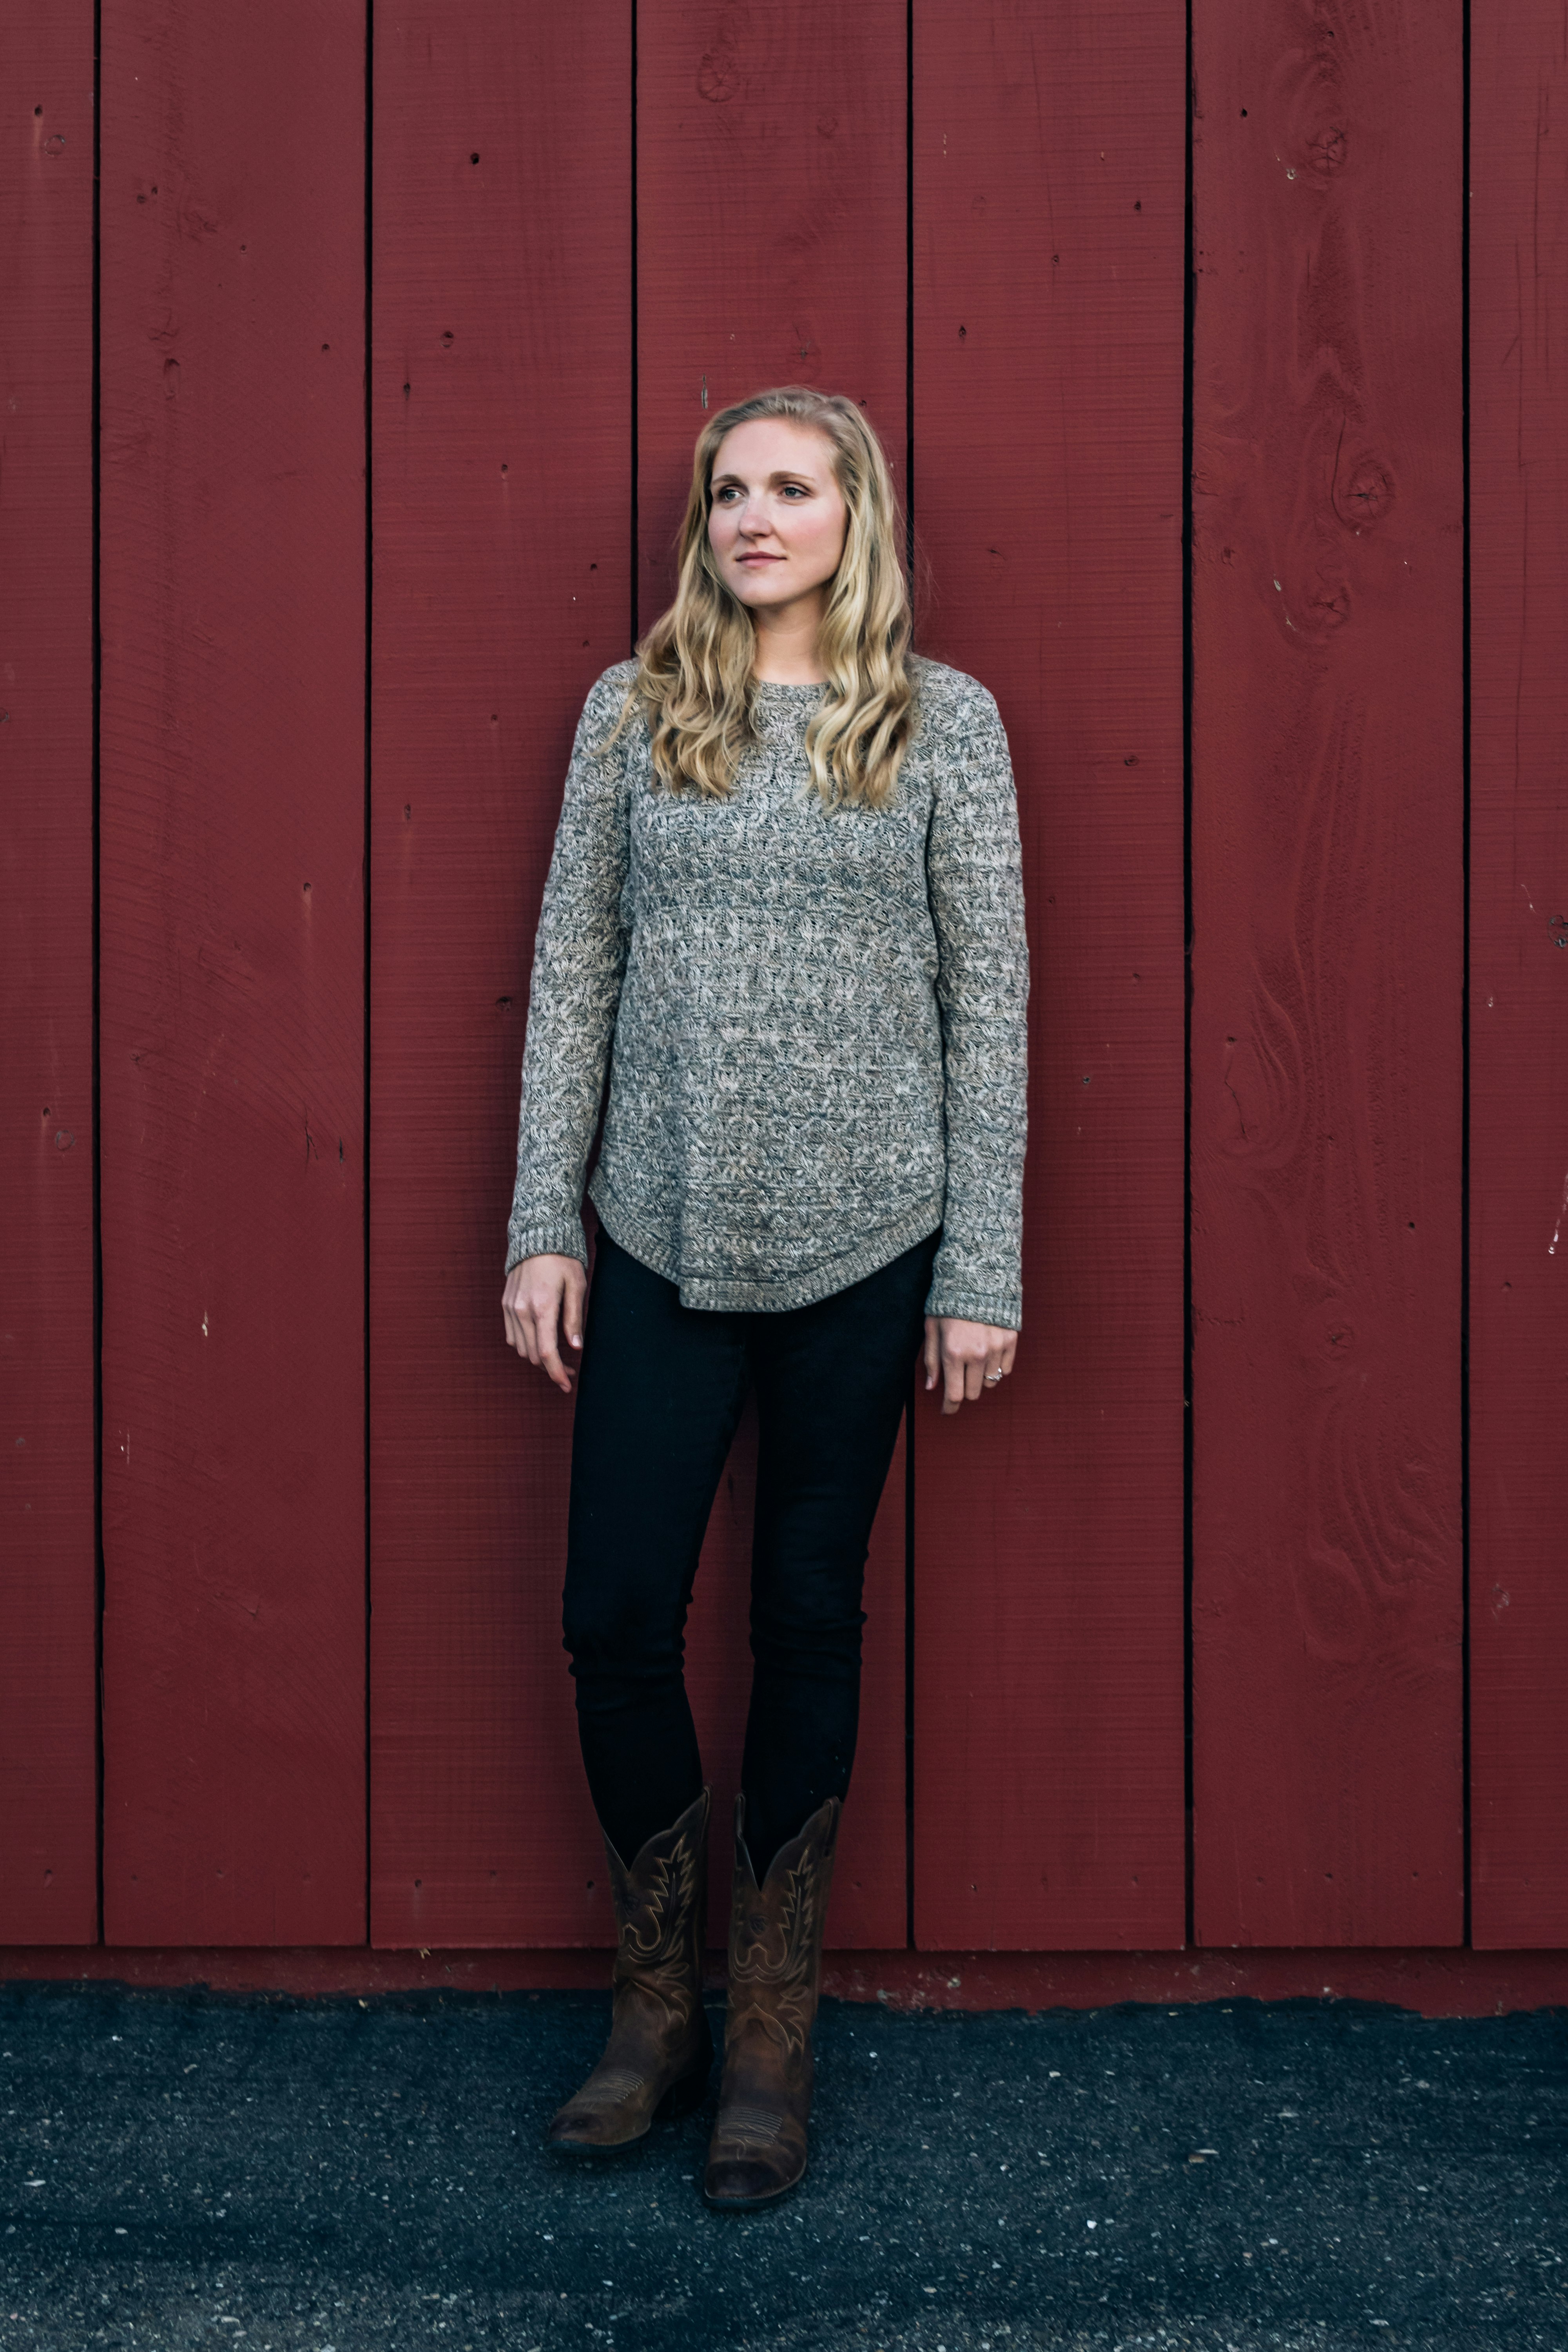 woman in gray sweater standing beside red wooden wall